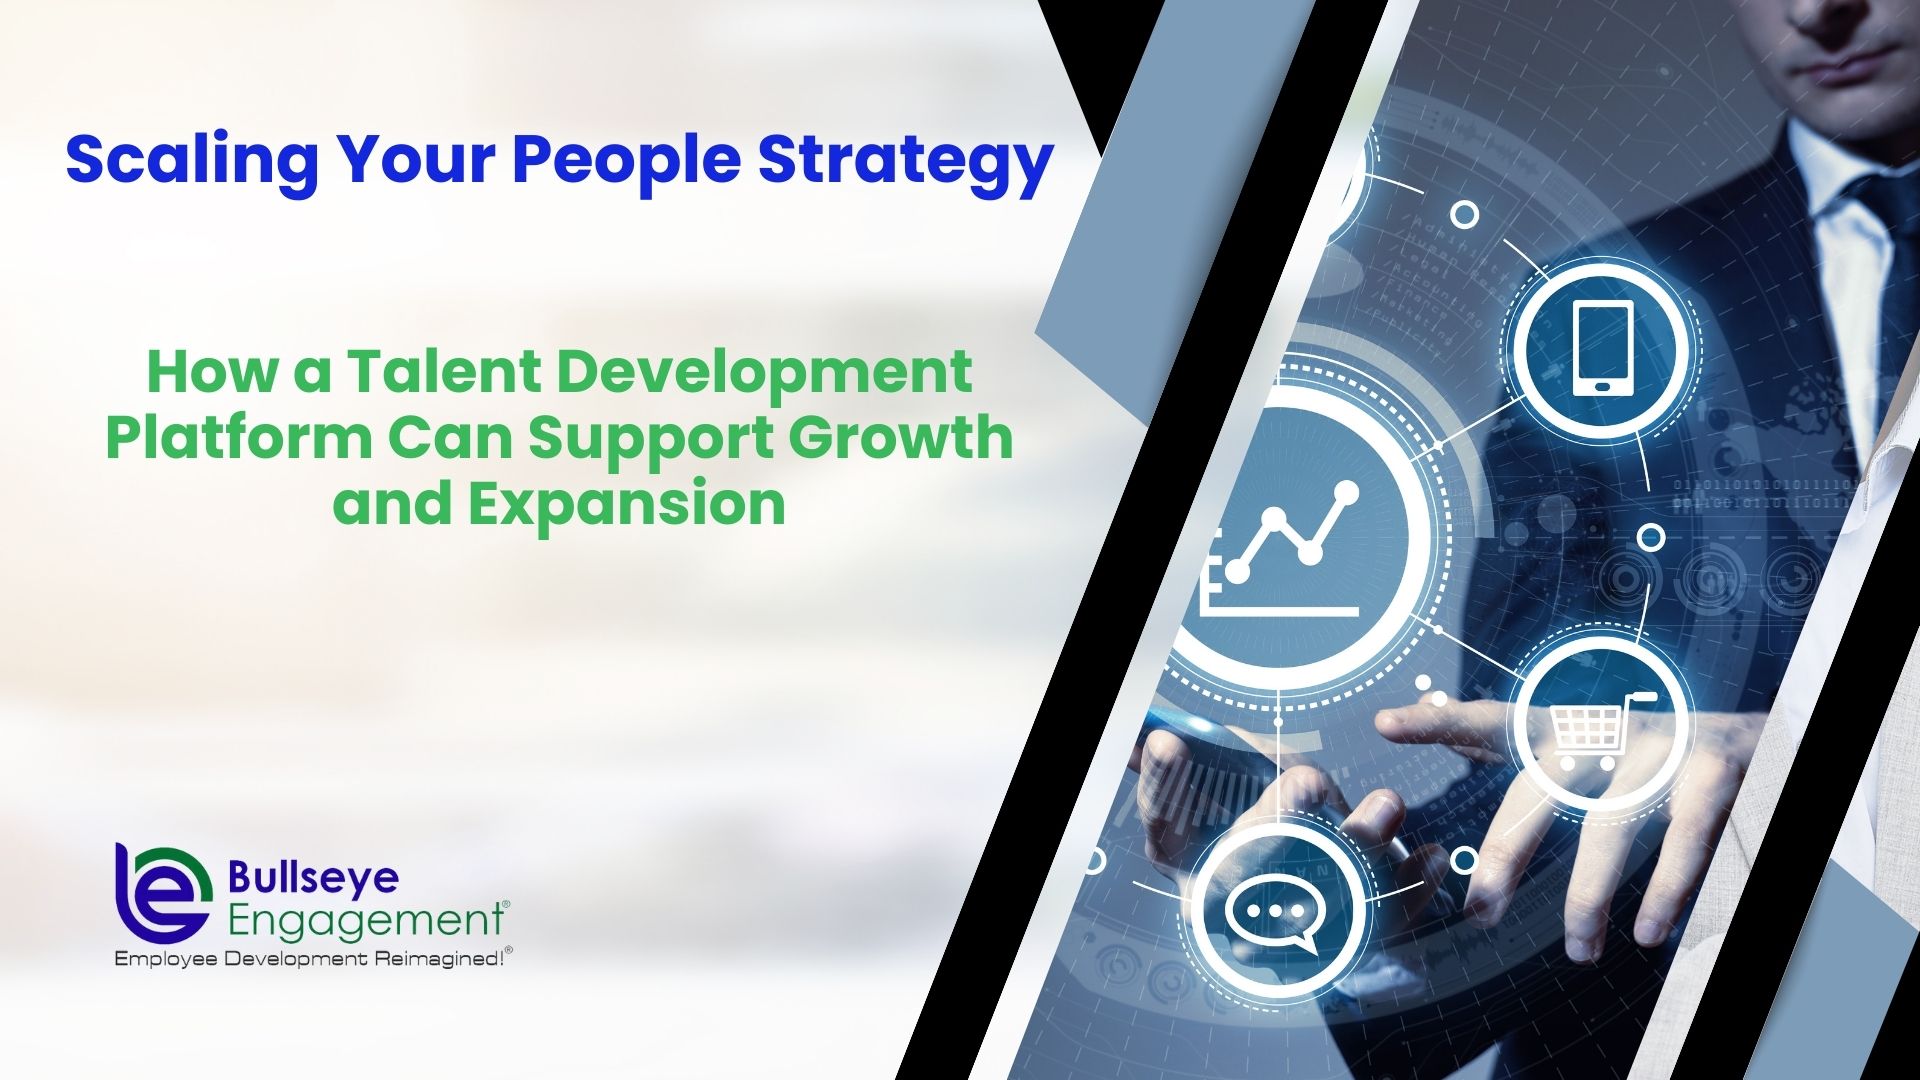 Scaling Your People Strategy: How a Talent Development Platform Can Support Growth and Expansion